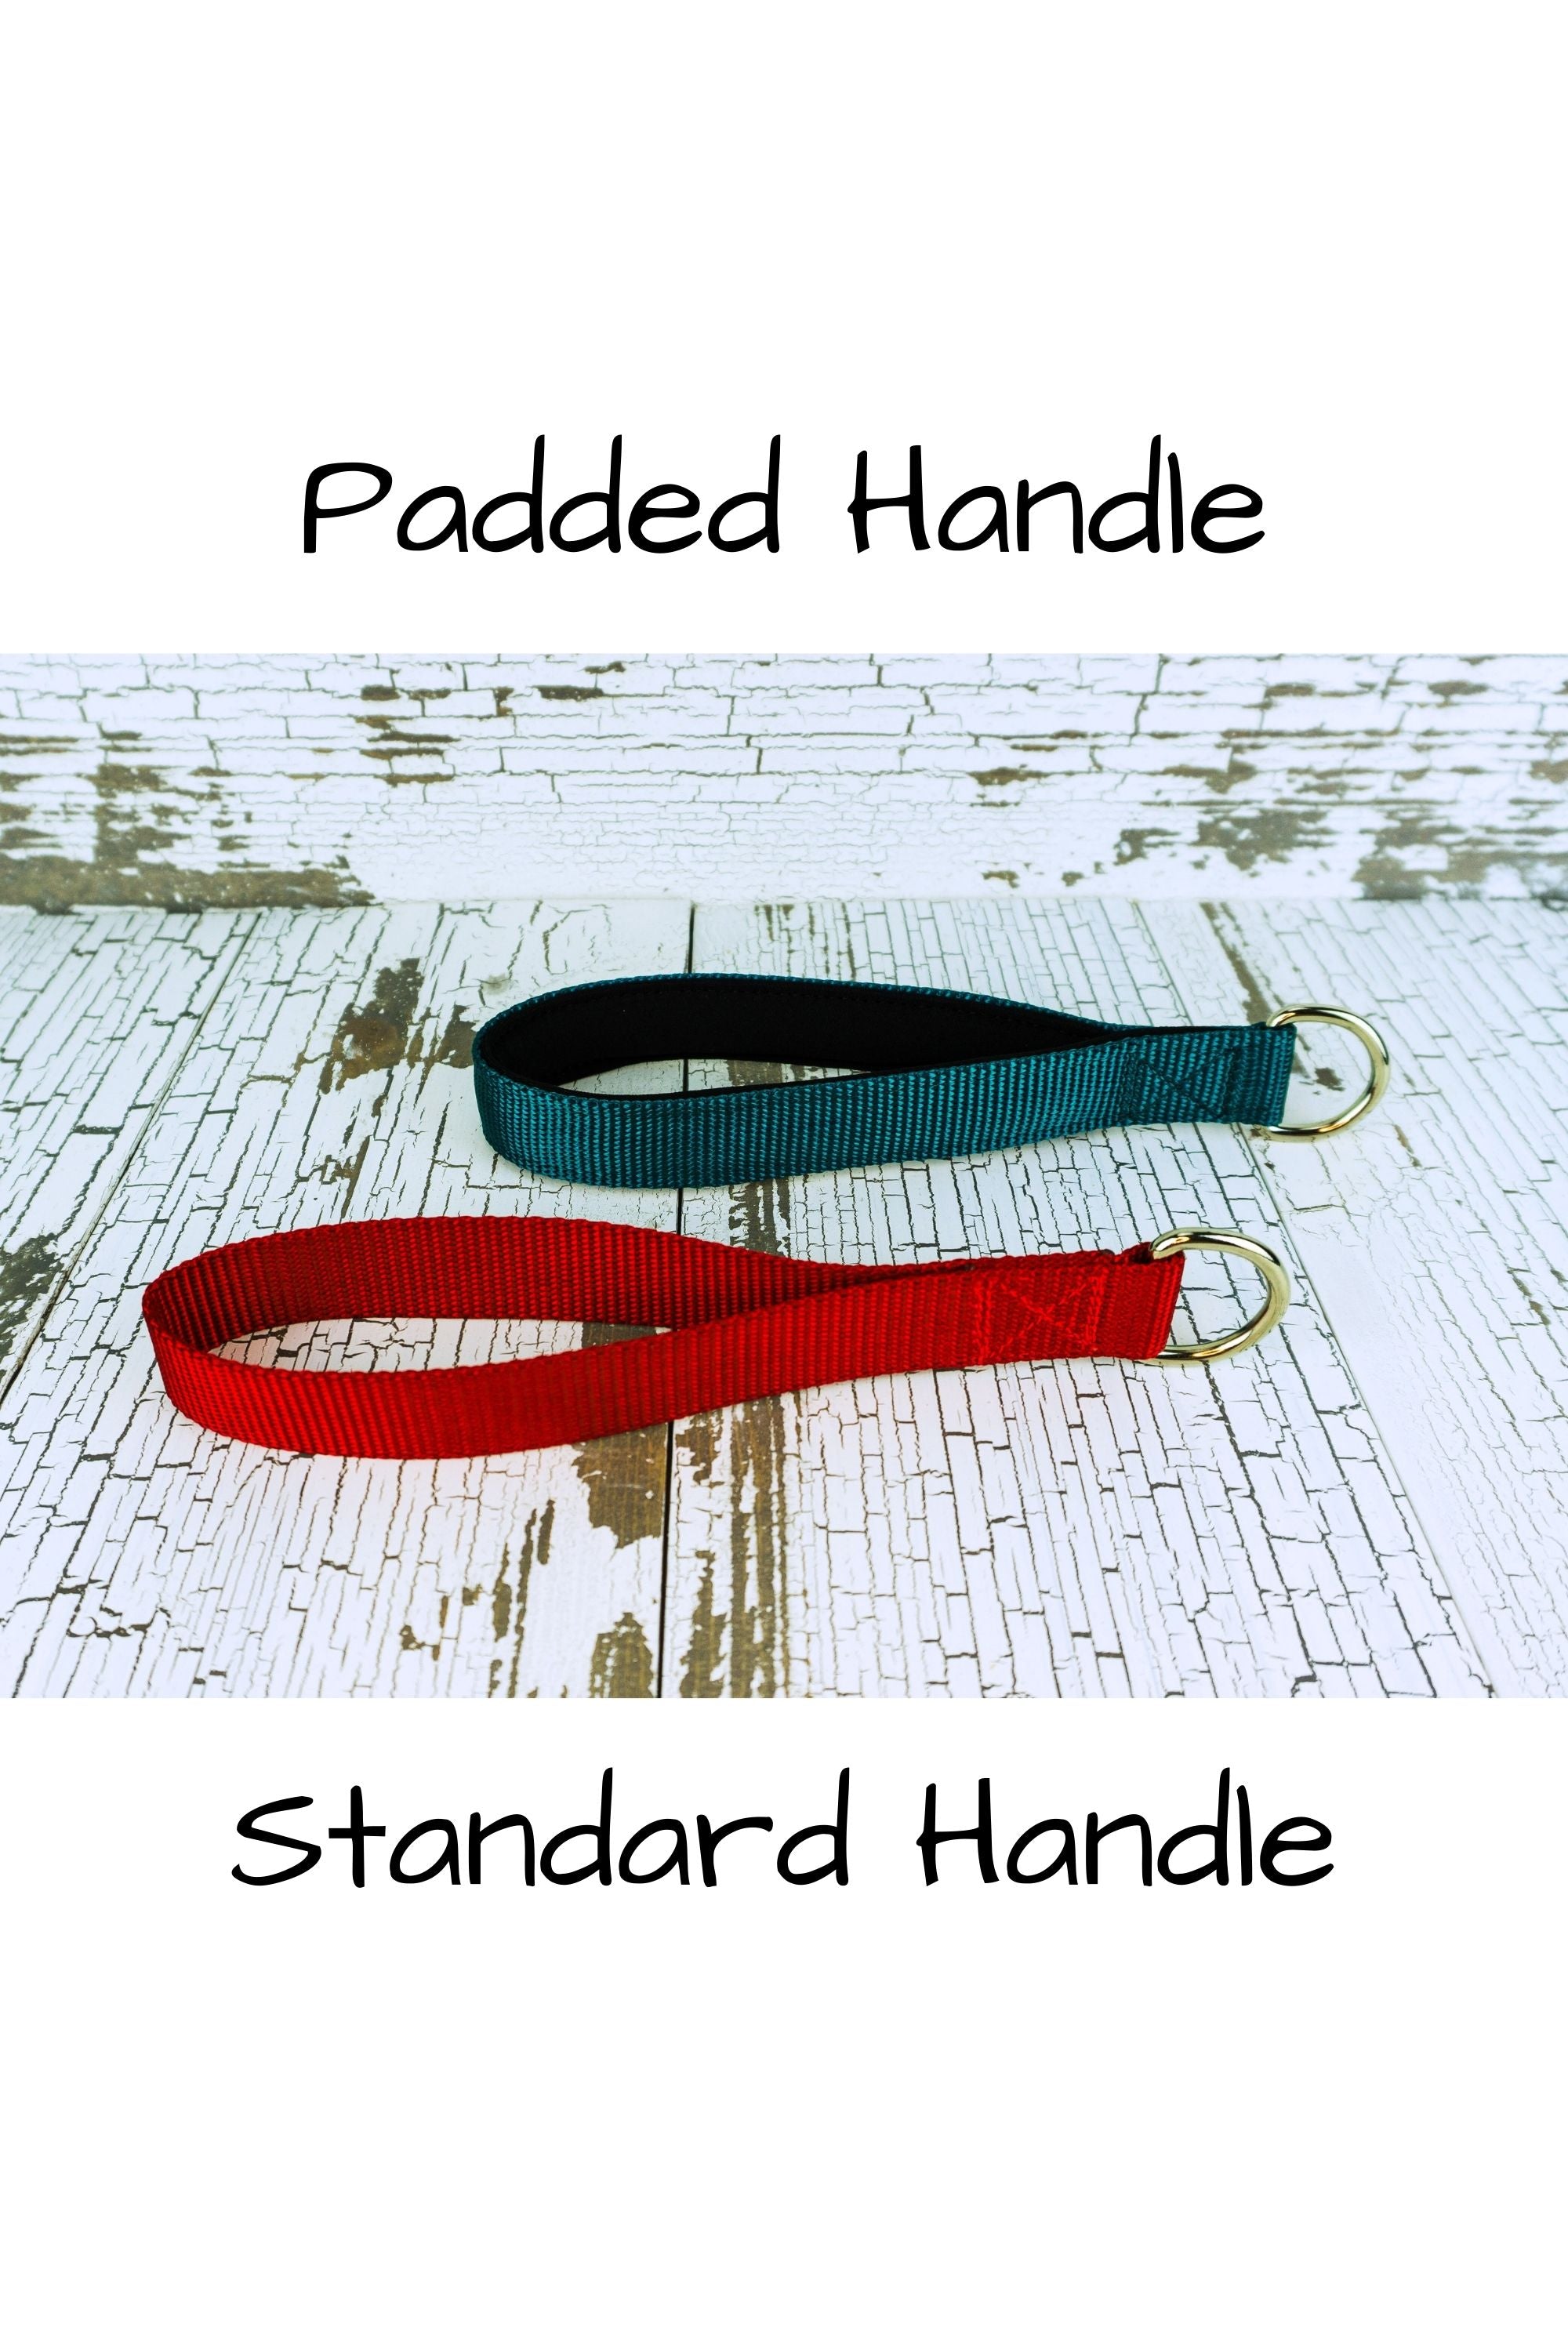 Adjustable no pull leashes are available with either standard handles made from heavy duty nylon webbing, or in a handle that is padded with black neoprene.